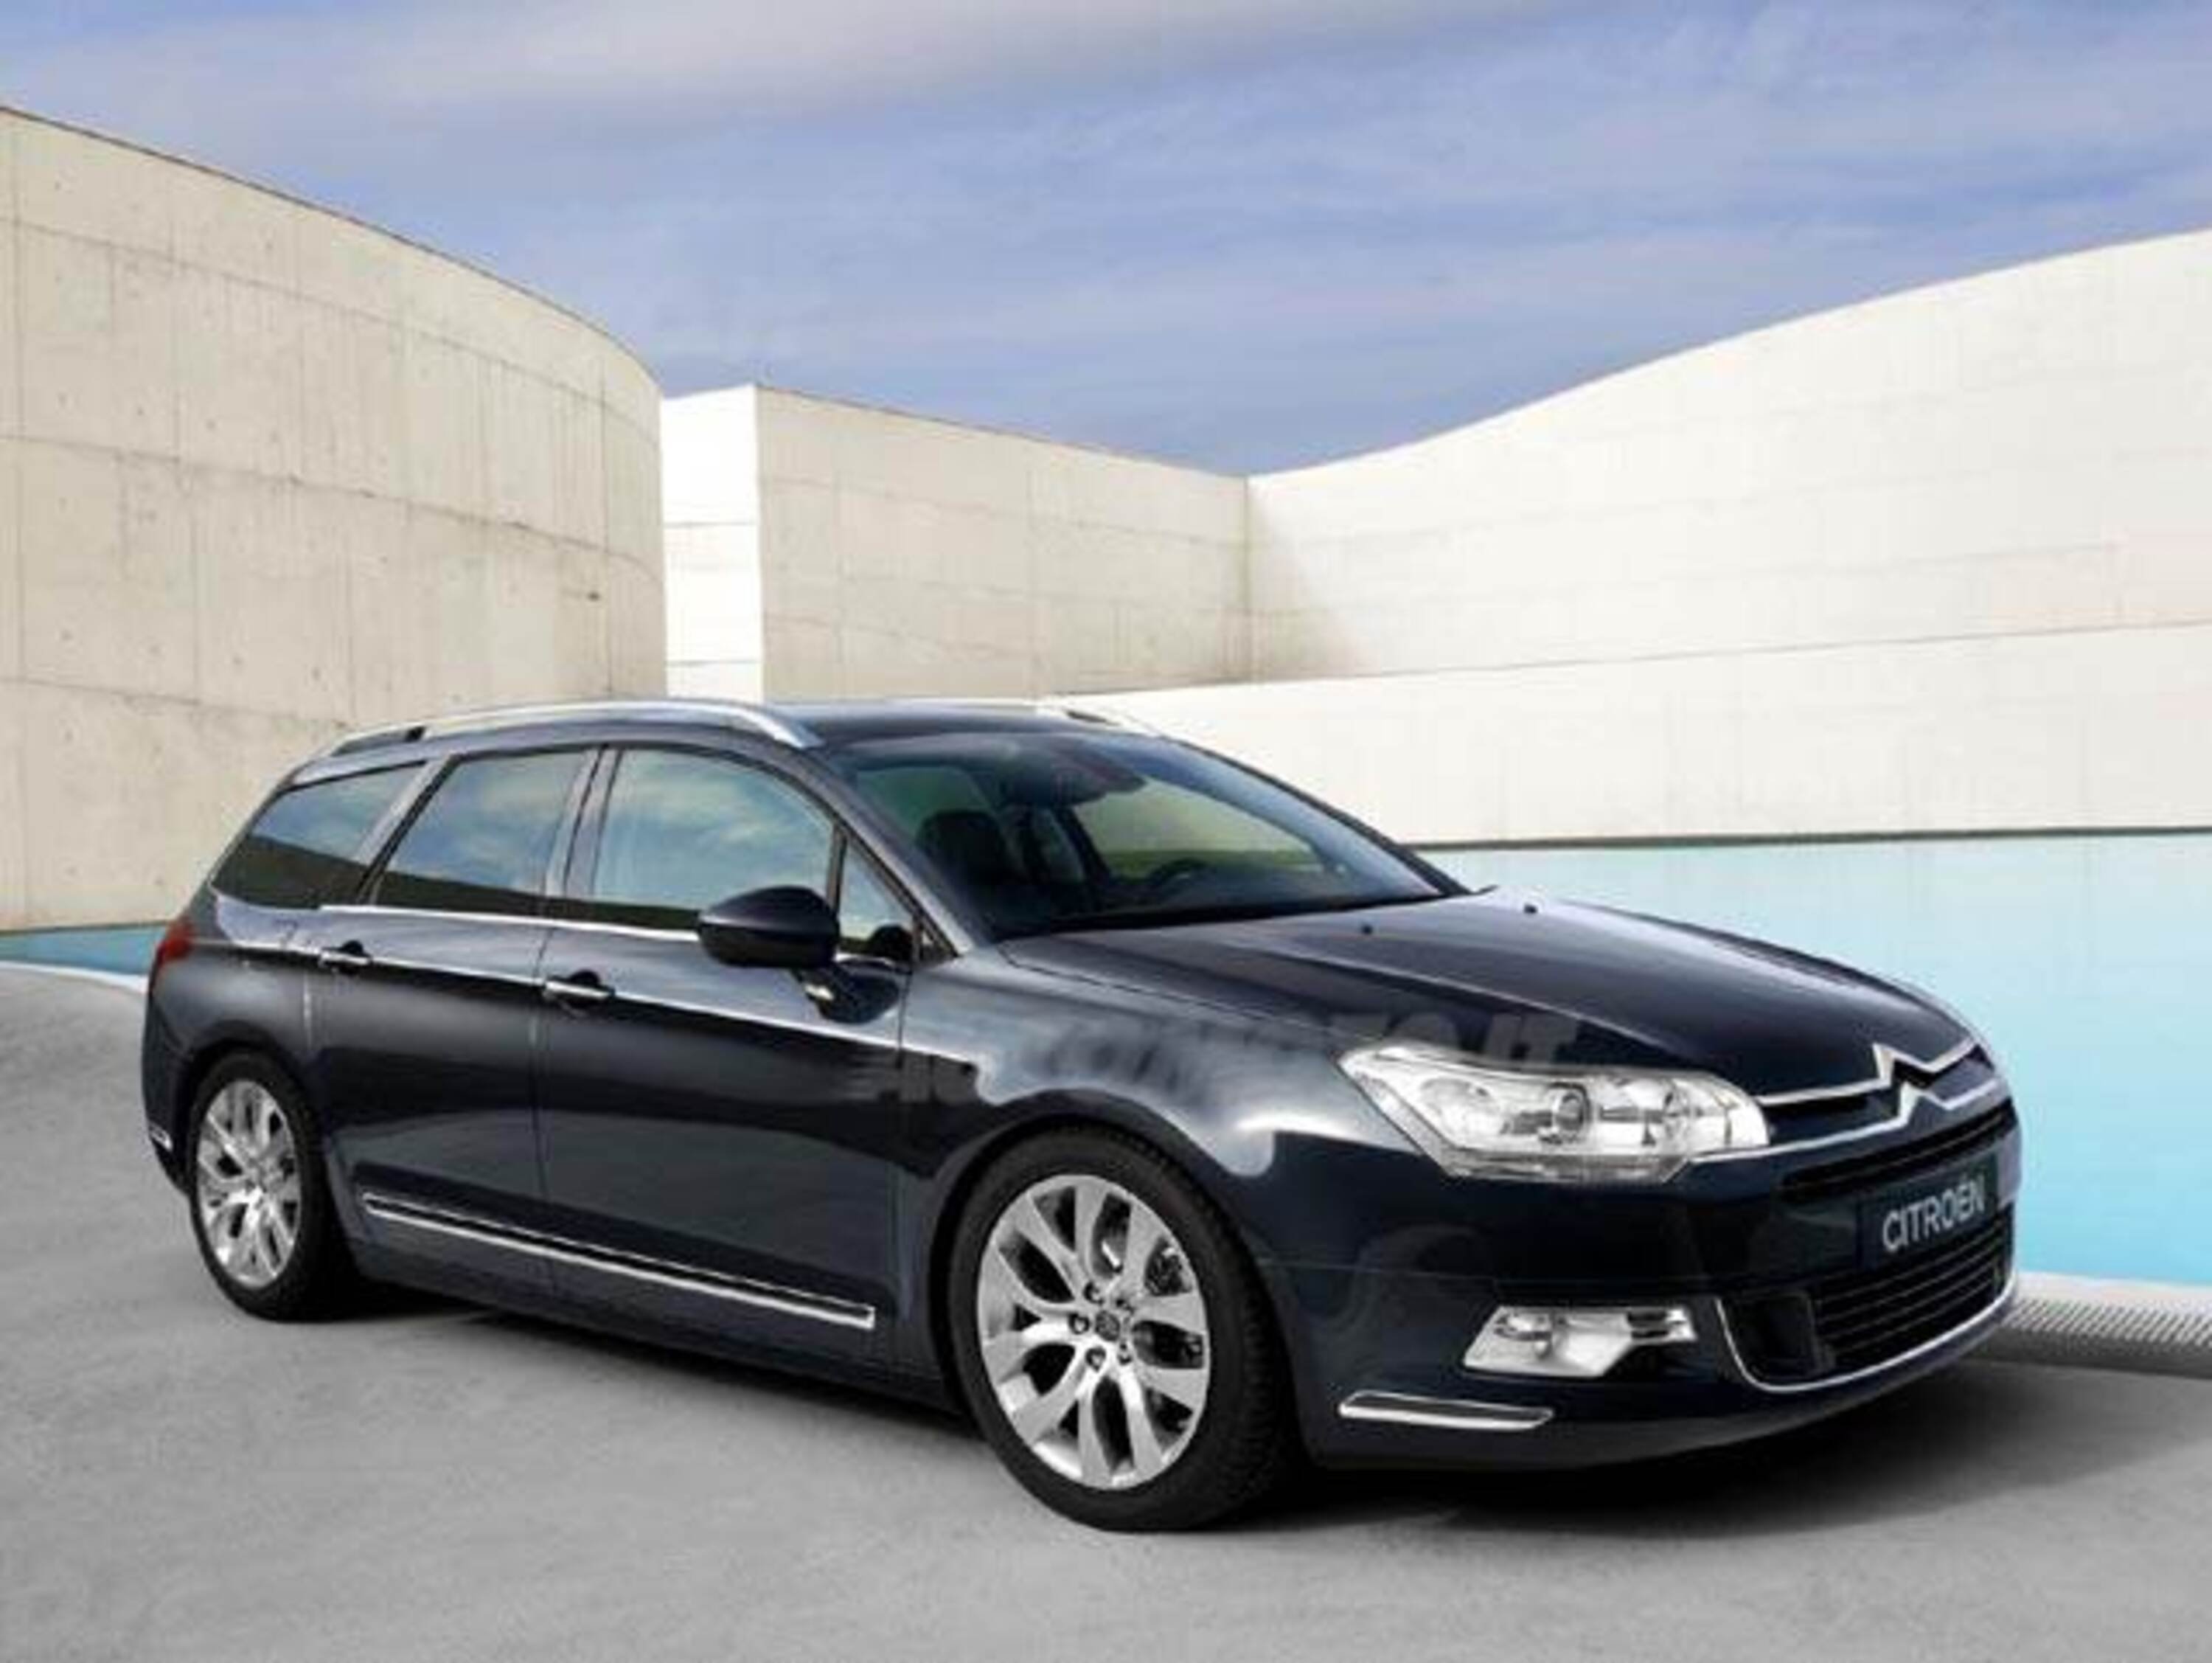 Citroen C5 Station Wagon 3.0 V6 B-T HDi 240 Exclusive Style